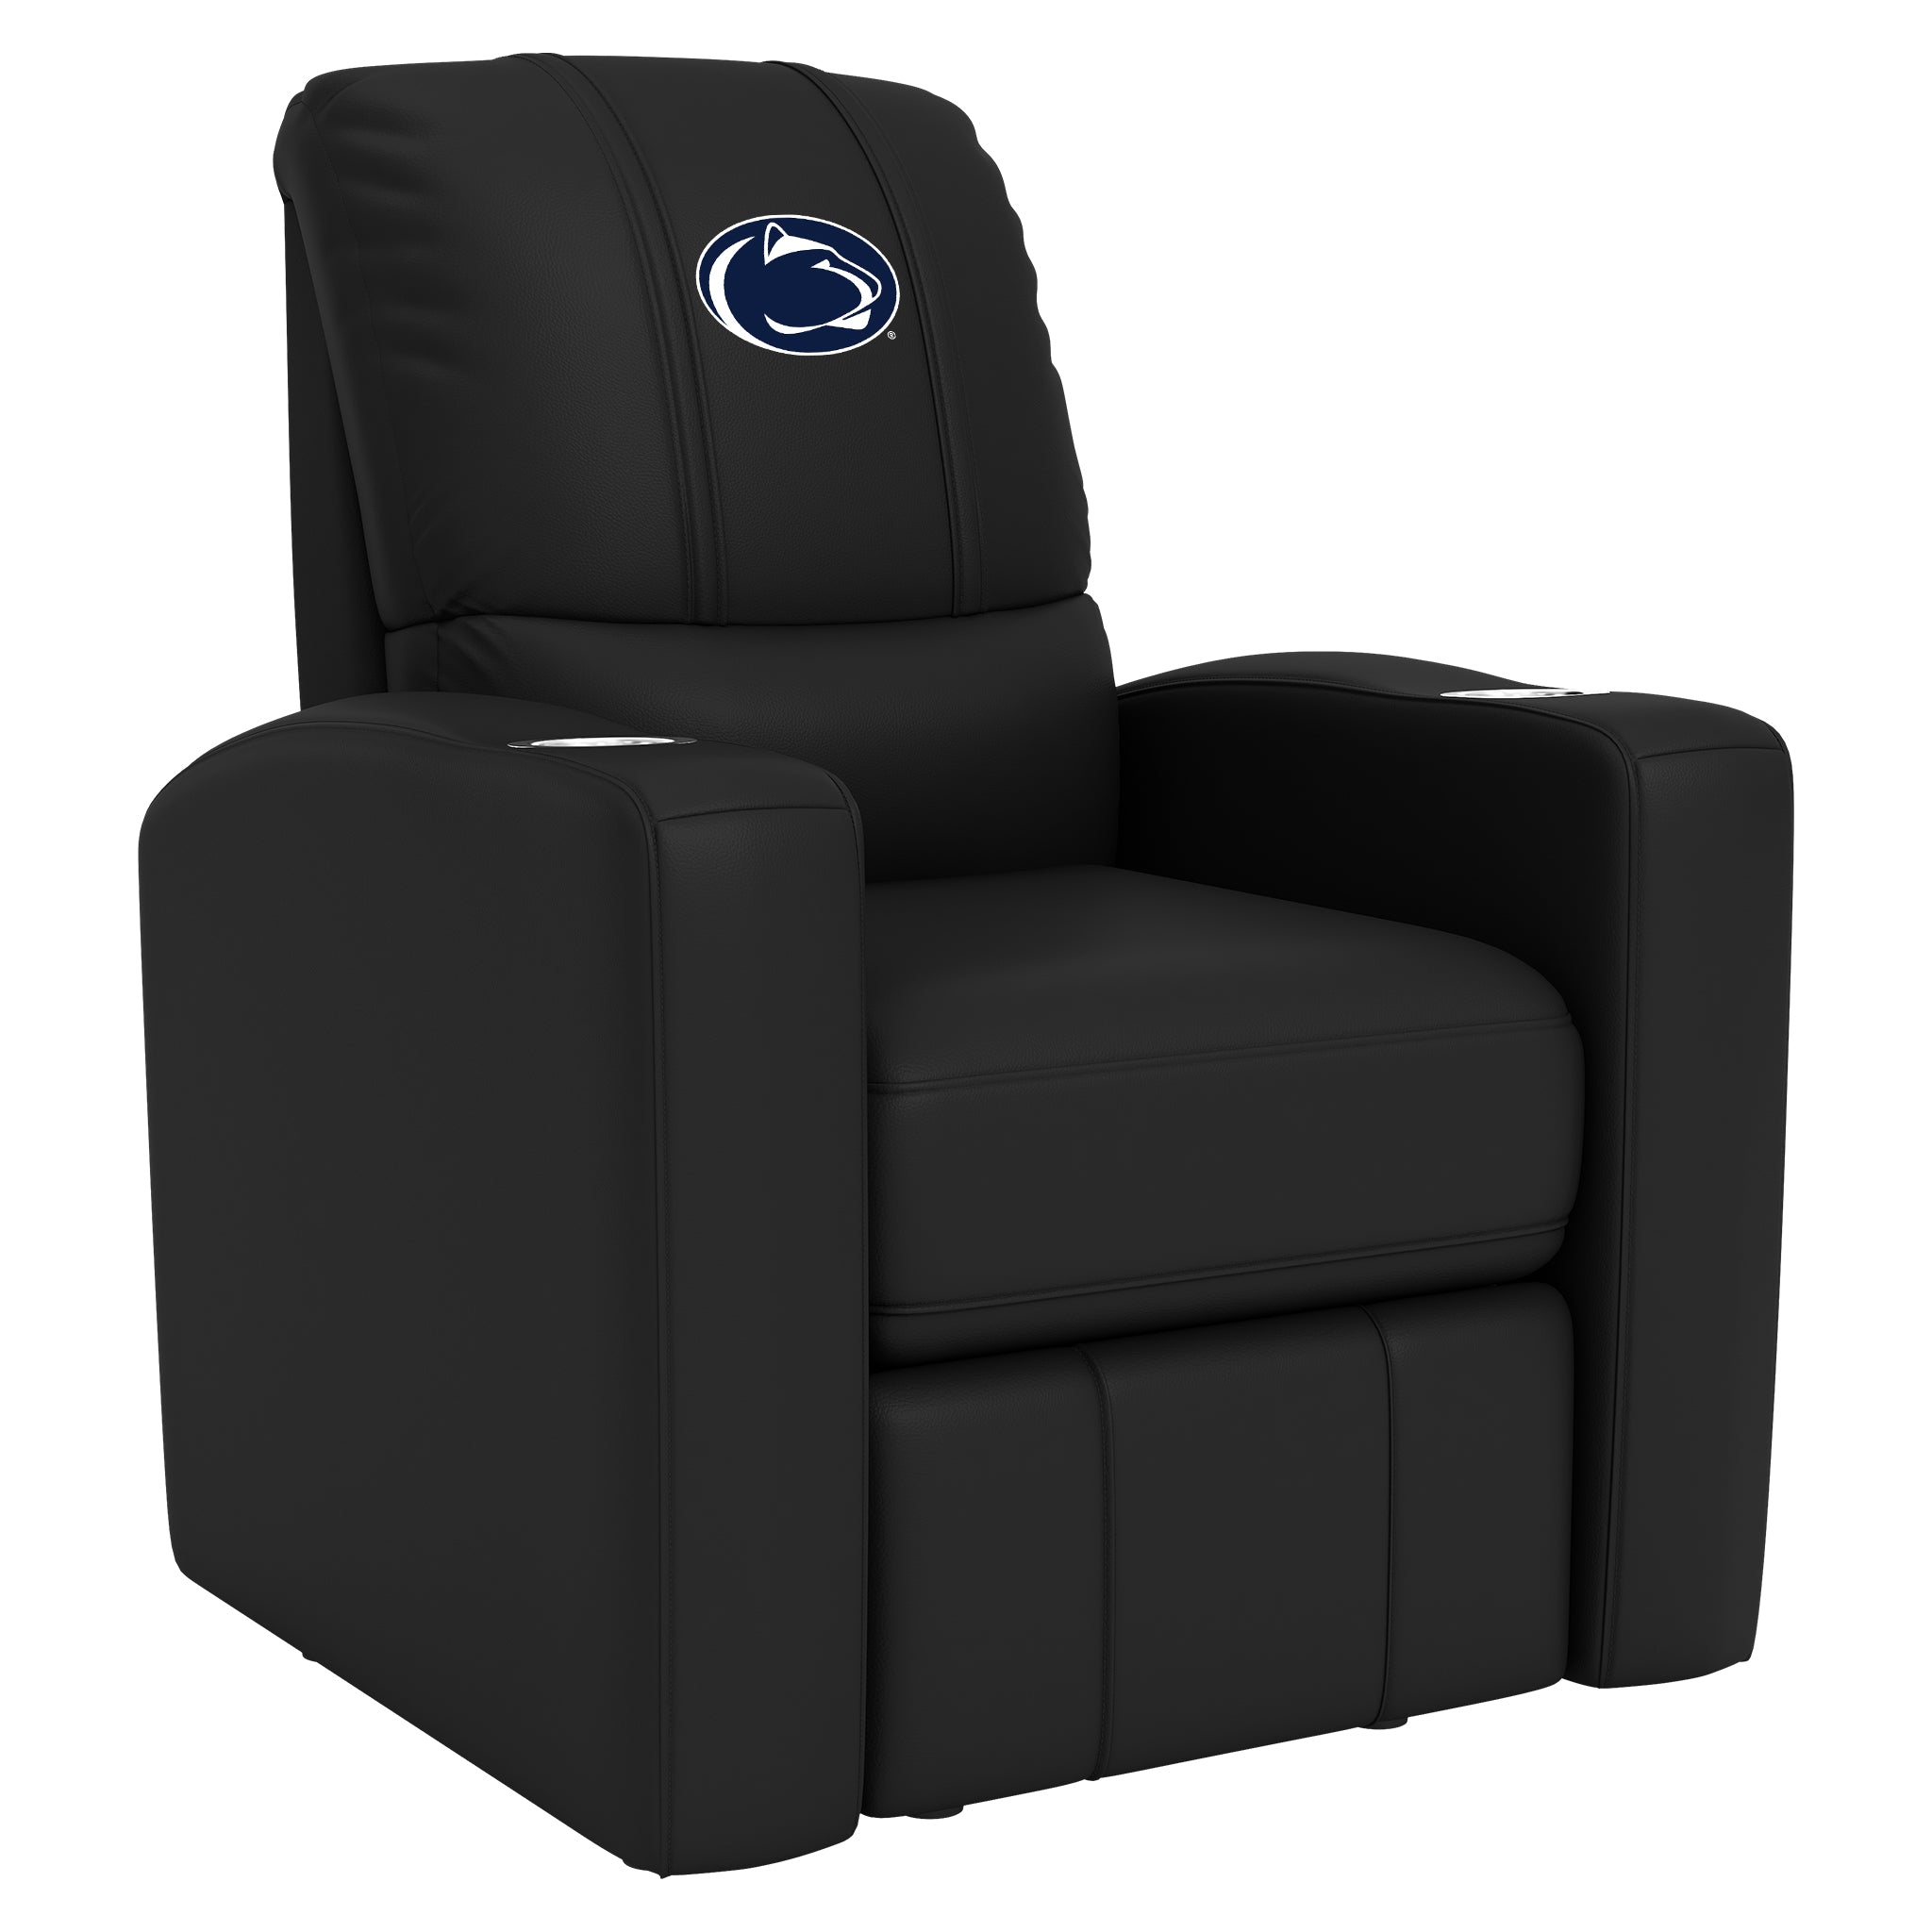 Penn State Nittany Lions Stealth Recliner with Penn State Nittany Lions Logo